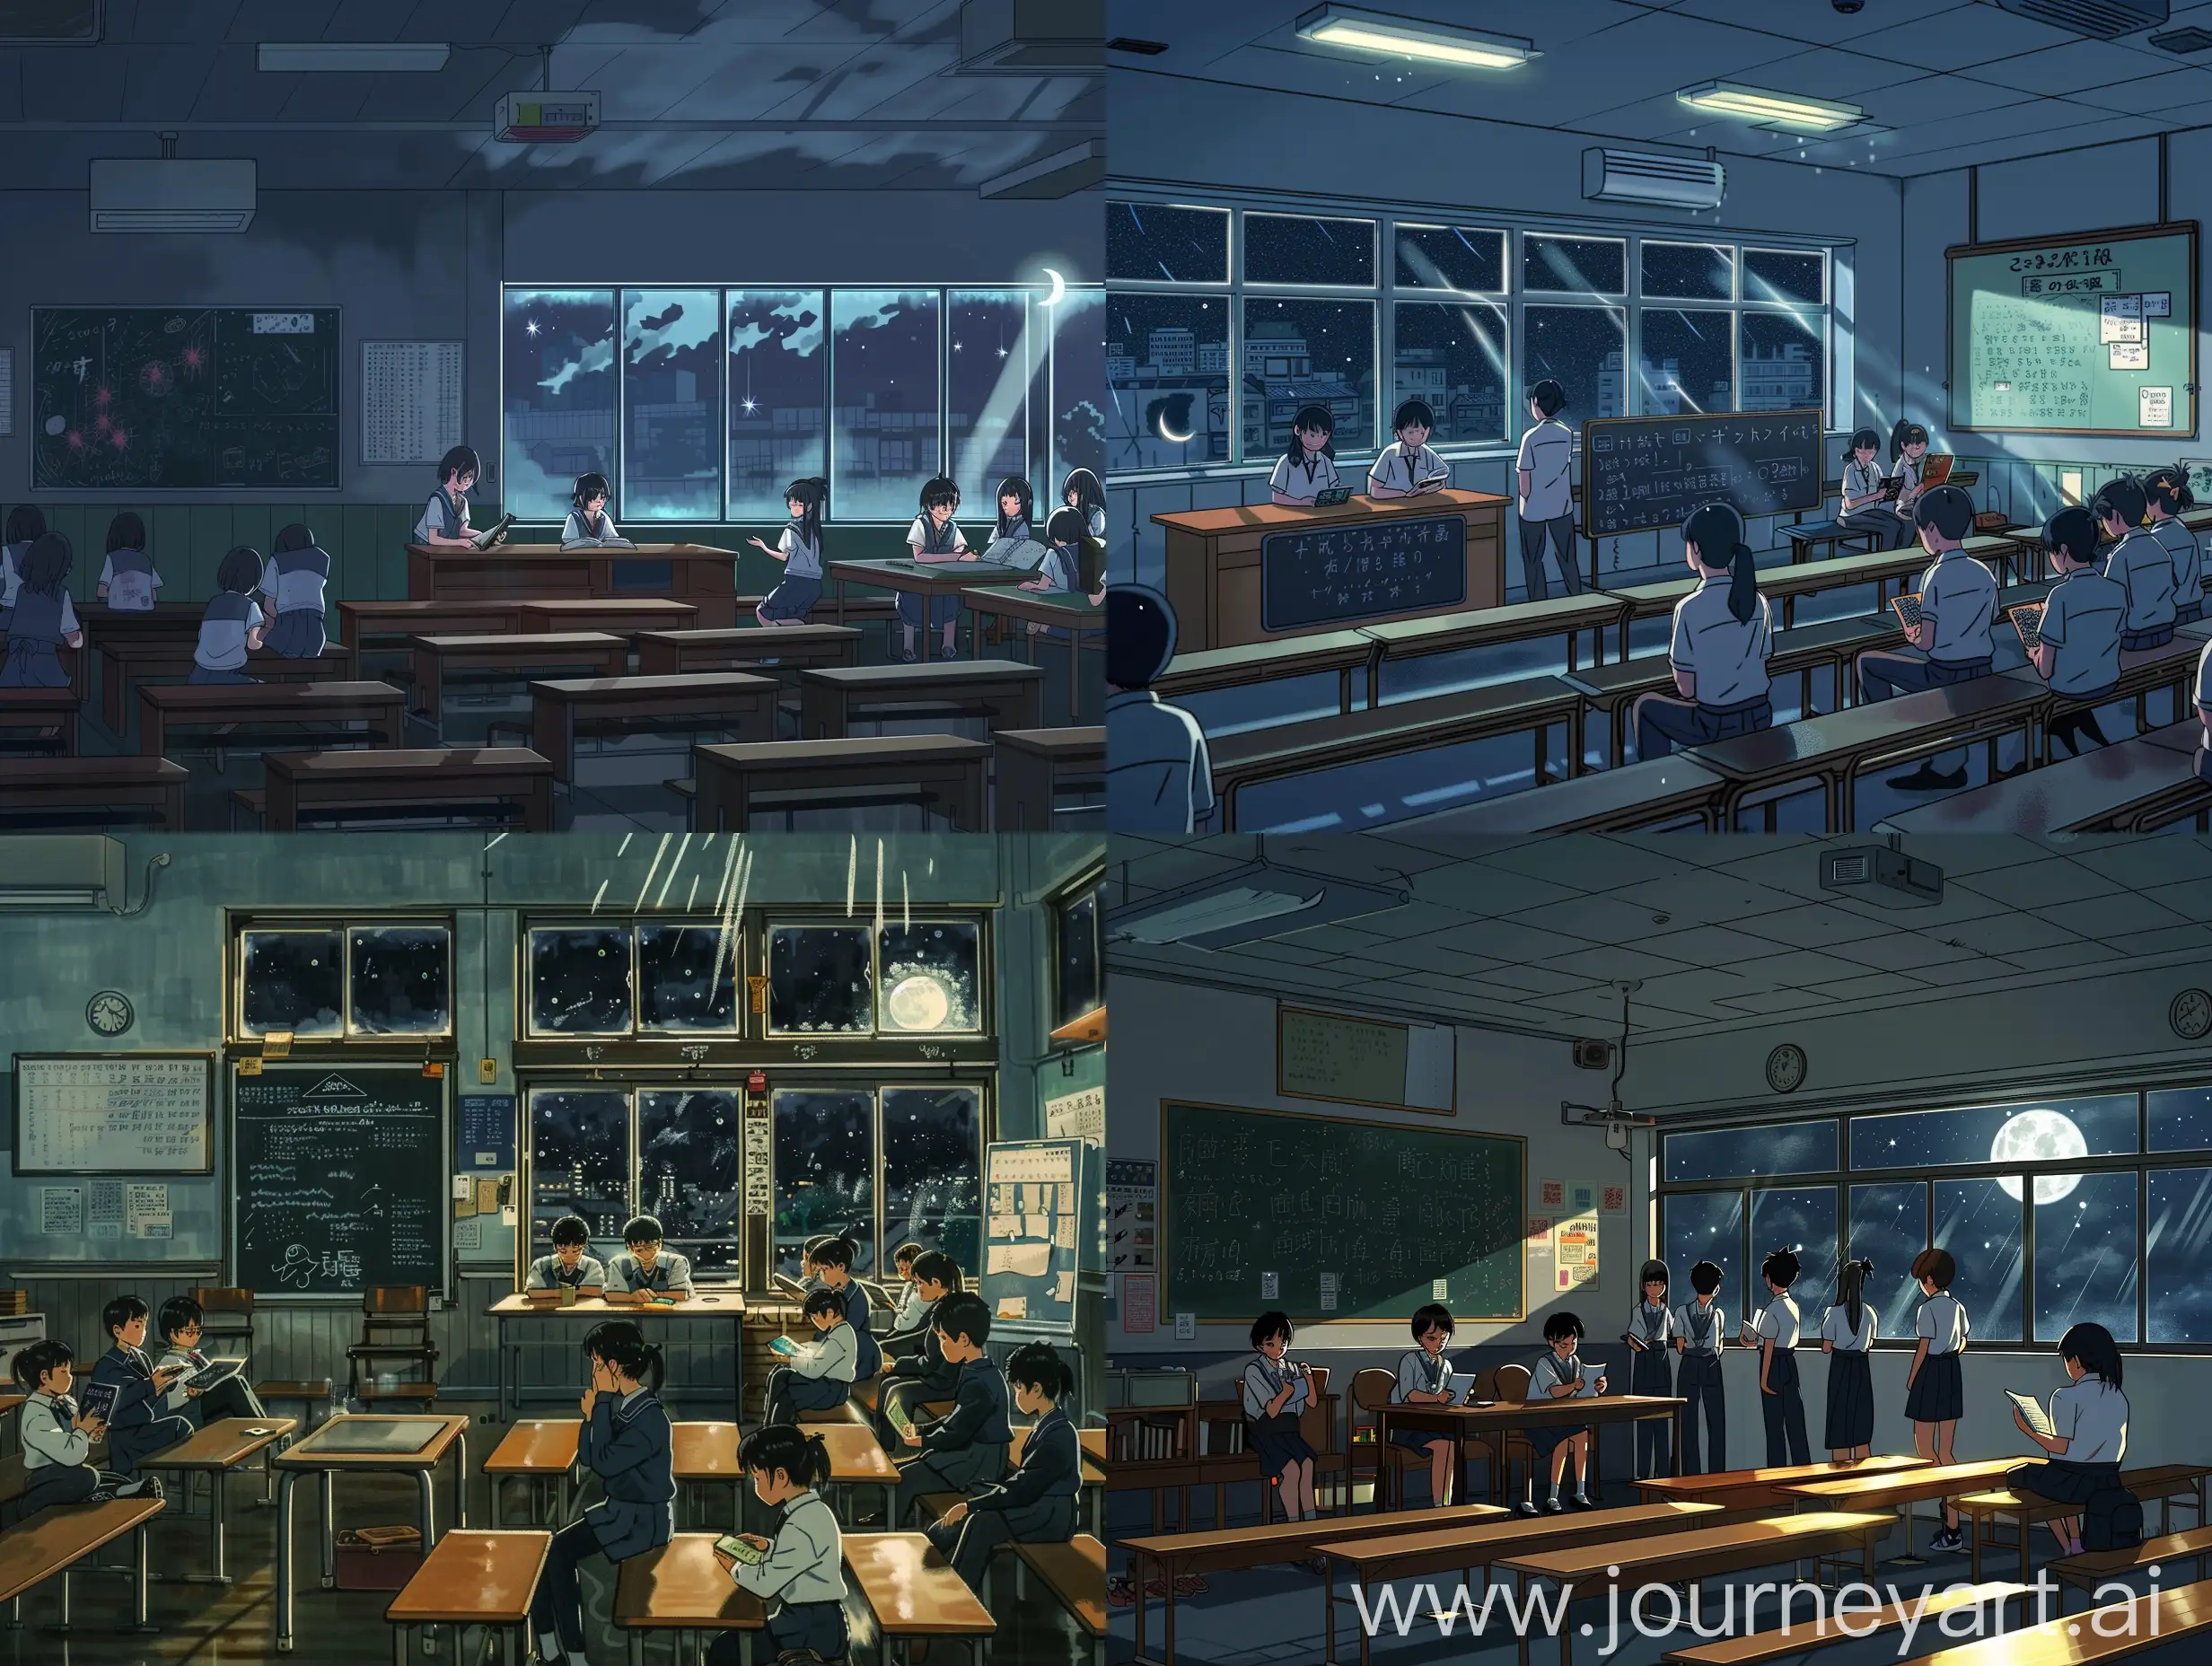 Inside of a Tokyo school darkened classroom at night, chalkboard on front wall with teaching table, a display board on side wall, benches arranged properly in straight rows in the classroom, many teenage students in uniform reading and talking, dark night outside is visible from window, moon rays entering from window --ar 4:3